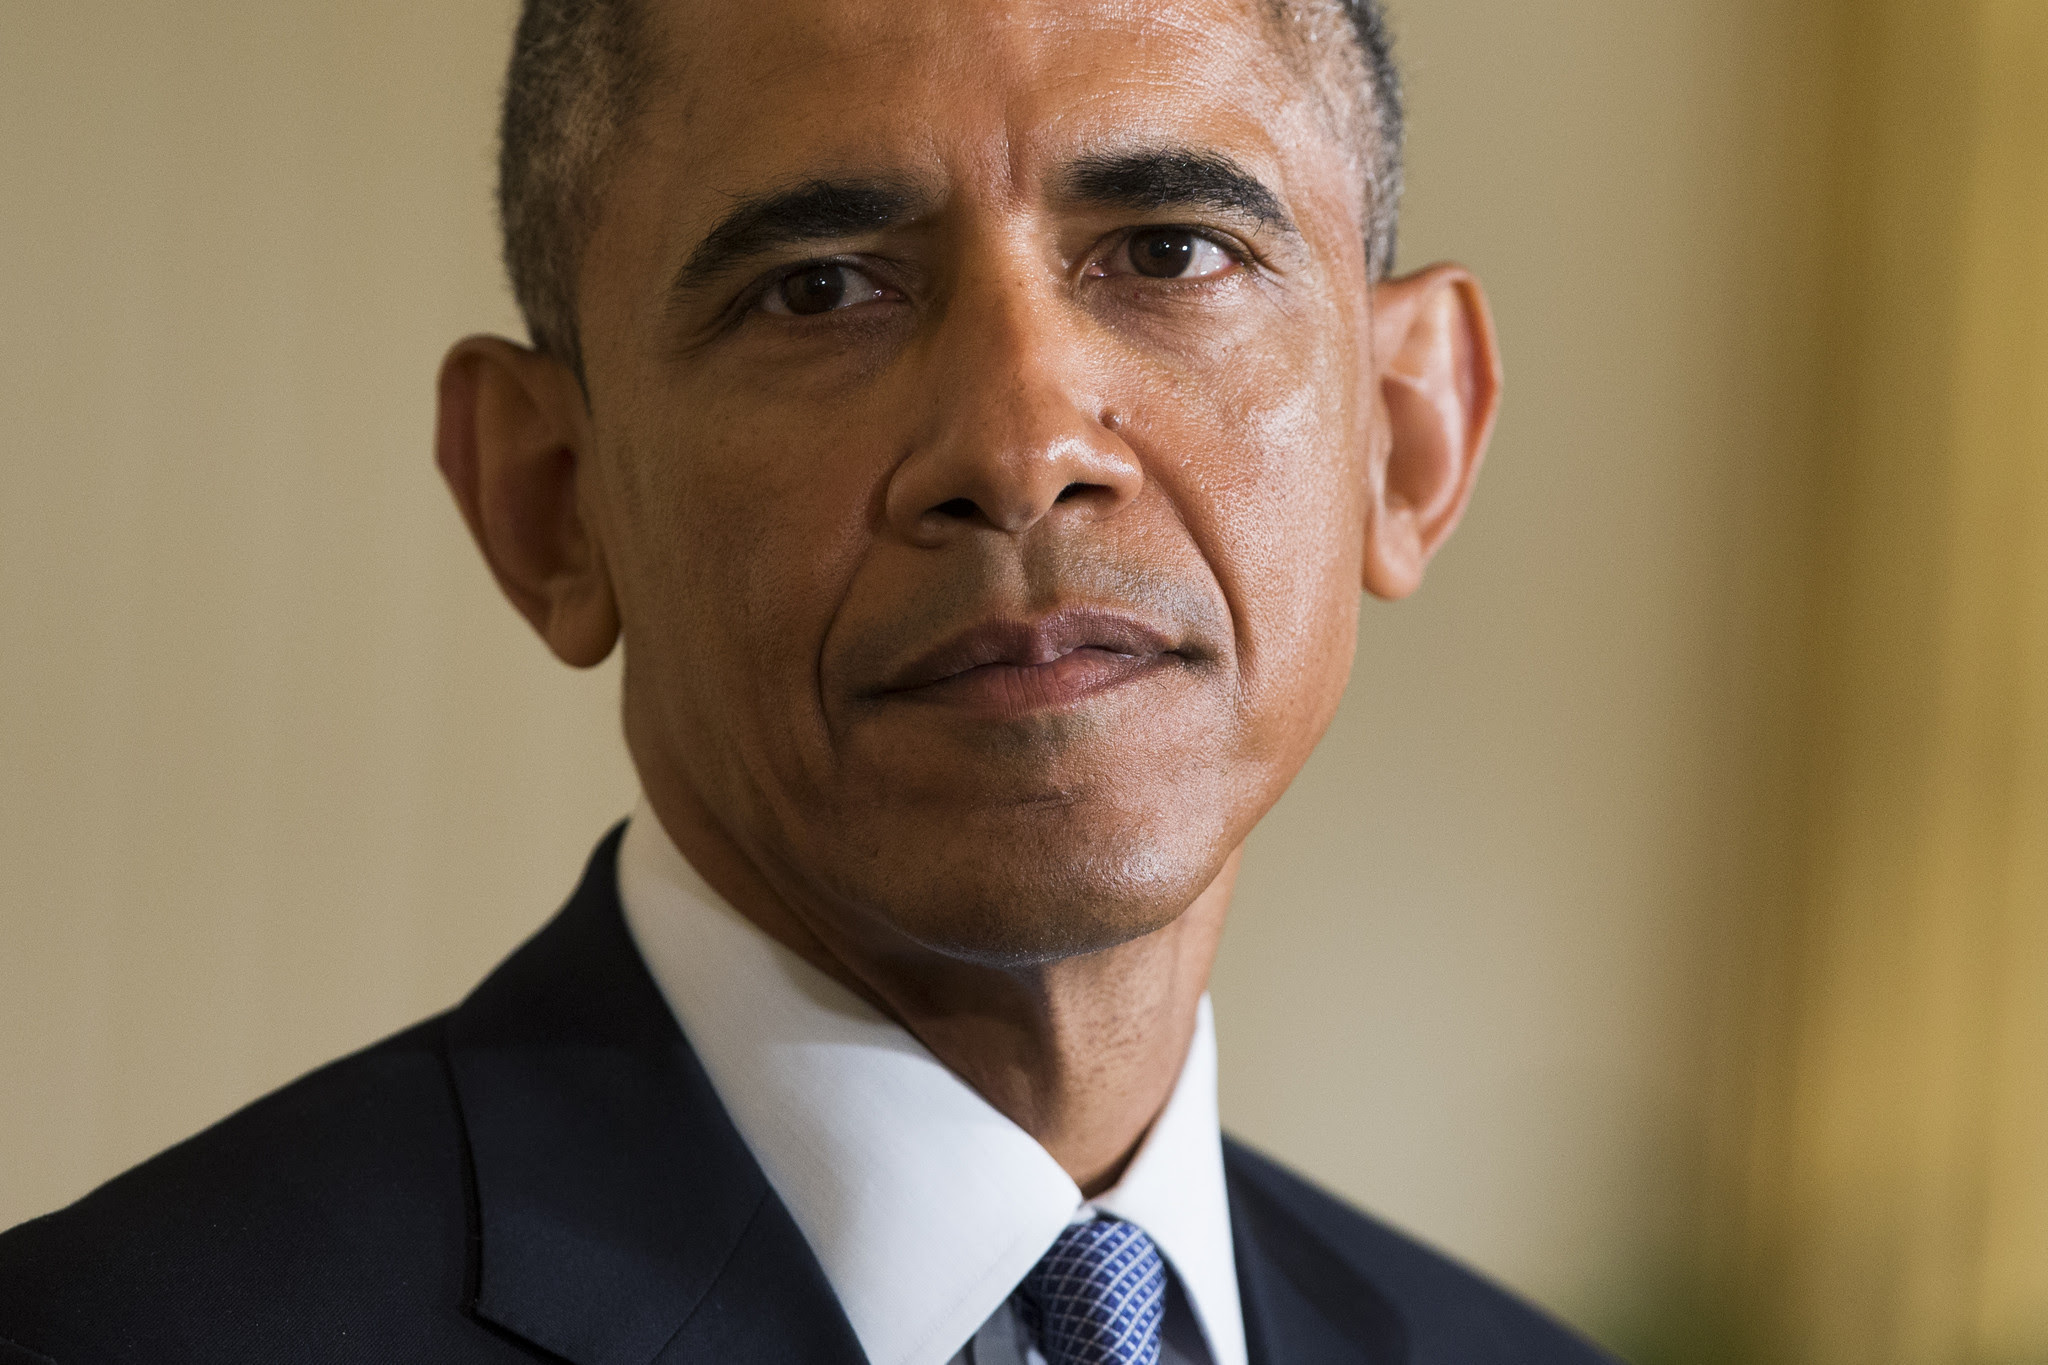 Obama takes on income inequality with his tax proposal